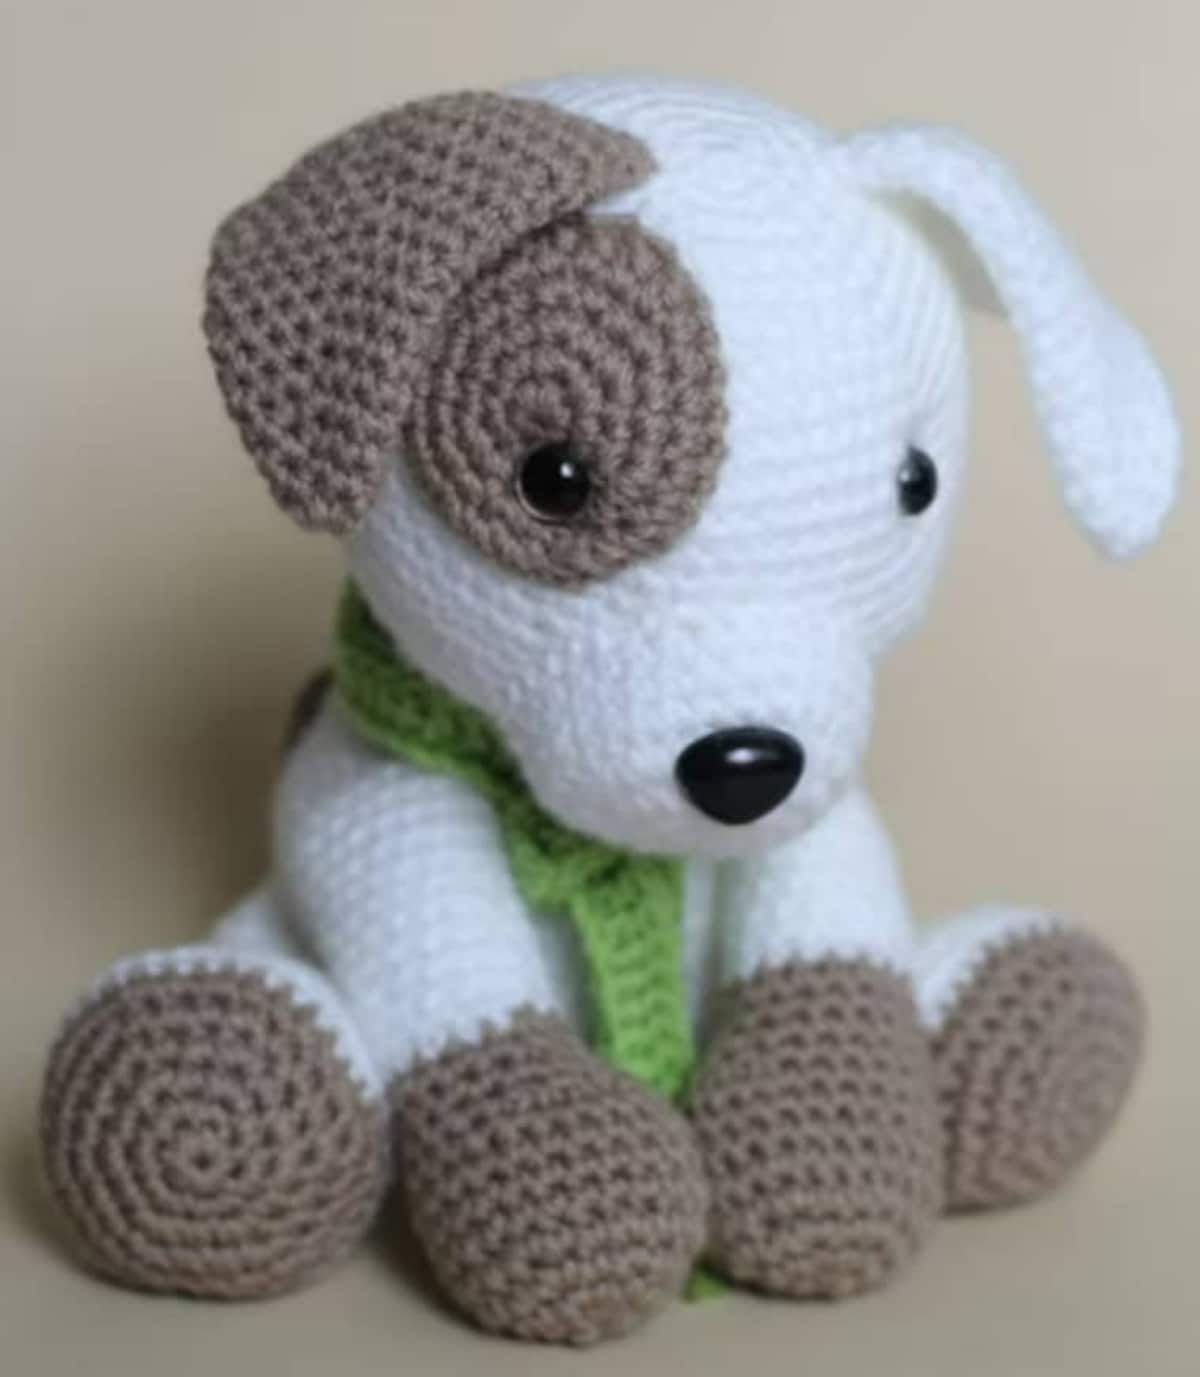 Crochet stuffed white dog with a brown patch over one eye, one brown ear, and brown feet wearing a green scarf.